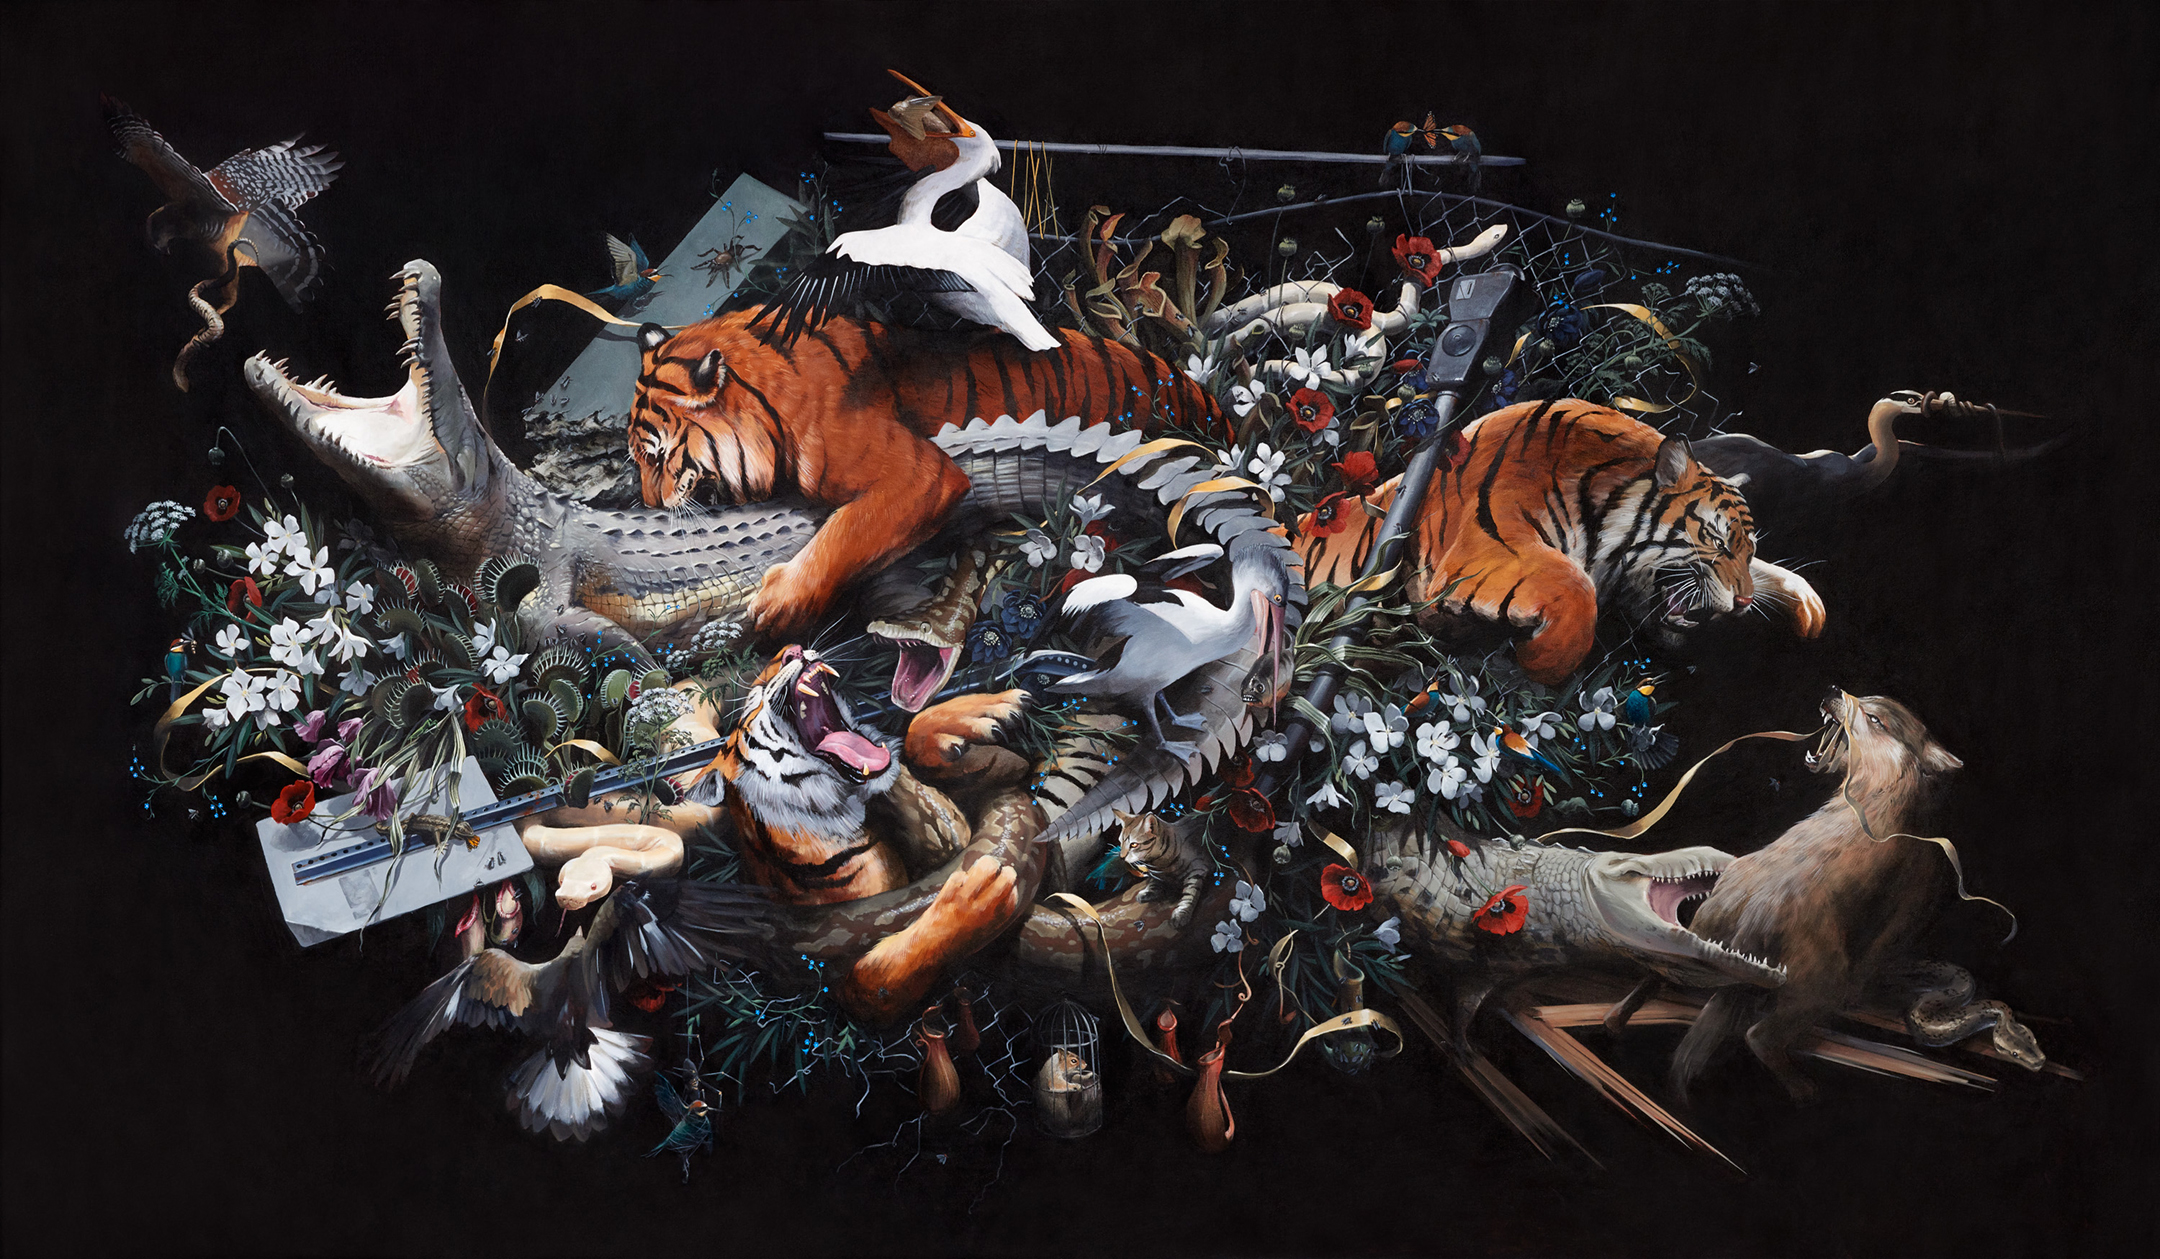   Beasts and Beauty, 2016  Acrylic on Canvas 304 x 182 cm / 120 x 72 in 